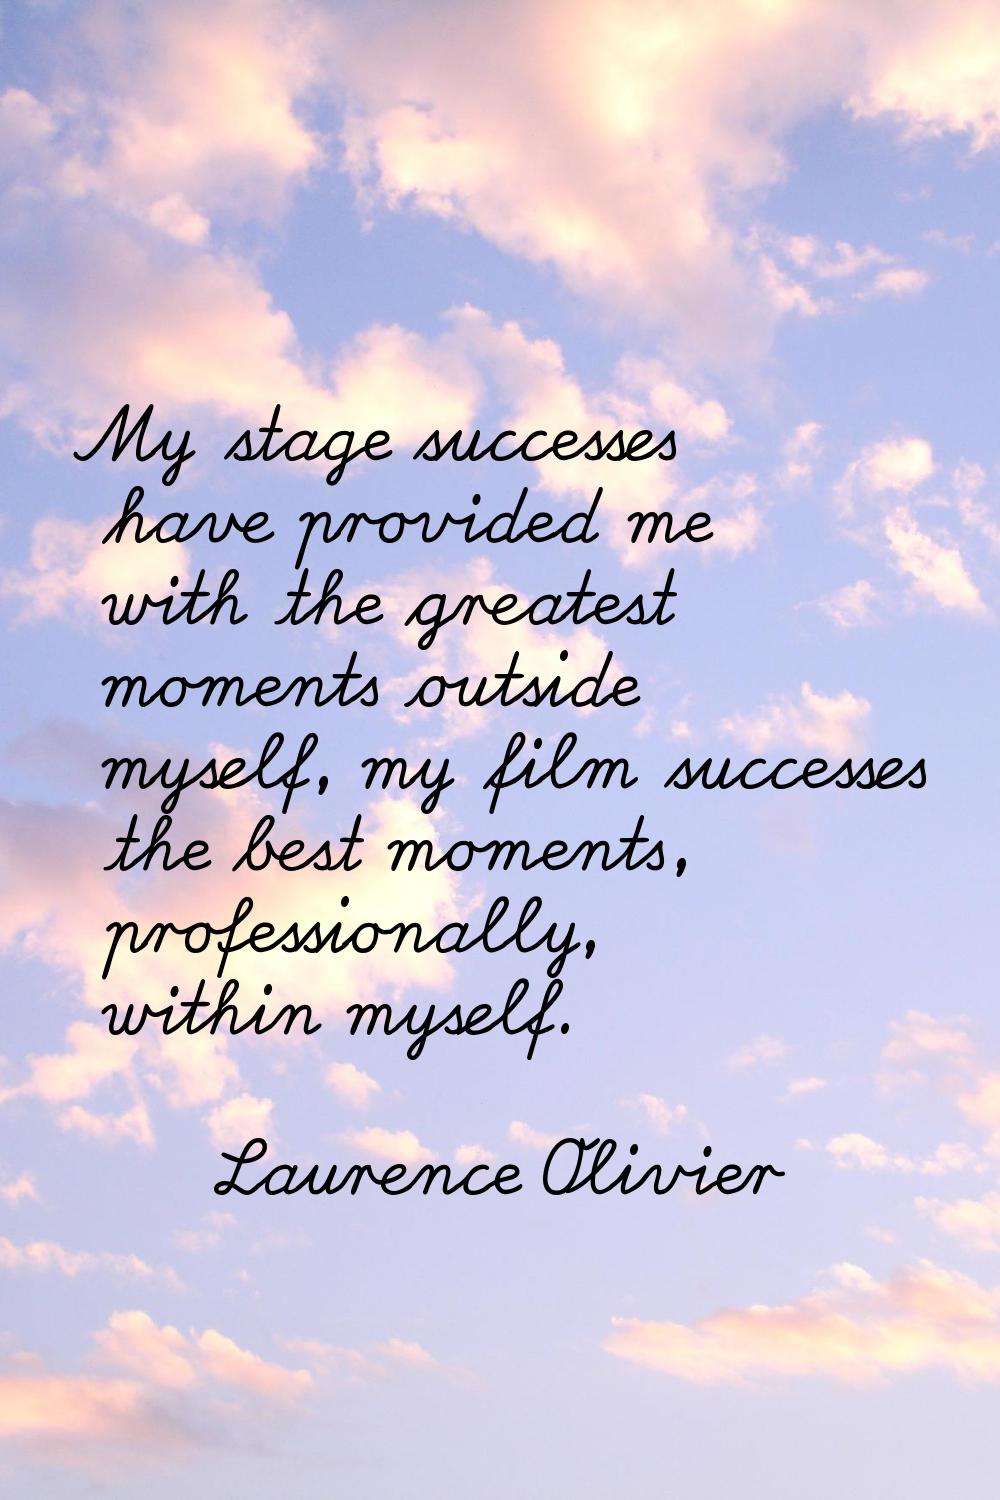 My stage successes have provided me with the greatest moments outside myself, my film successes the